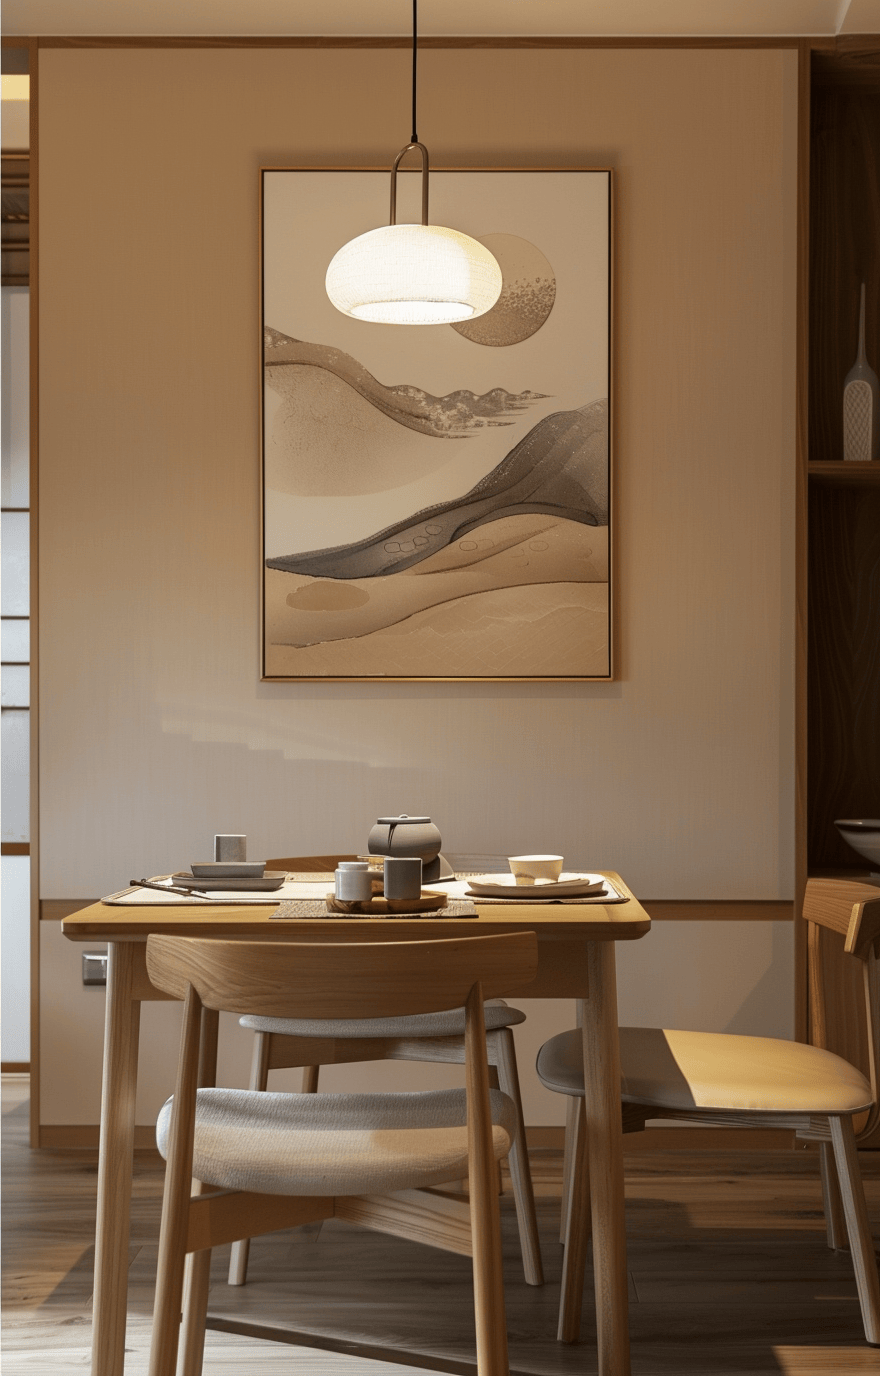 Japanese calligraphy art as a focal point in a Japandi dining room